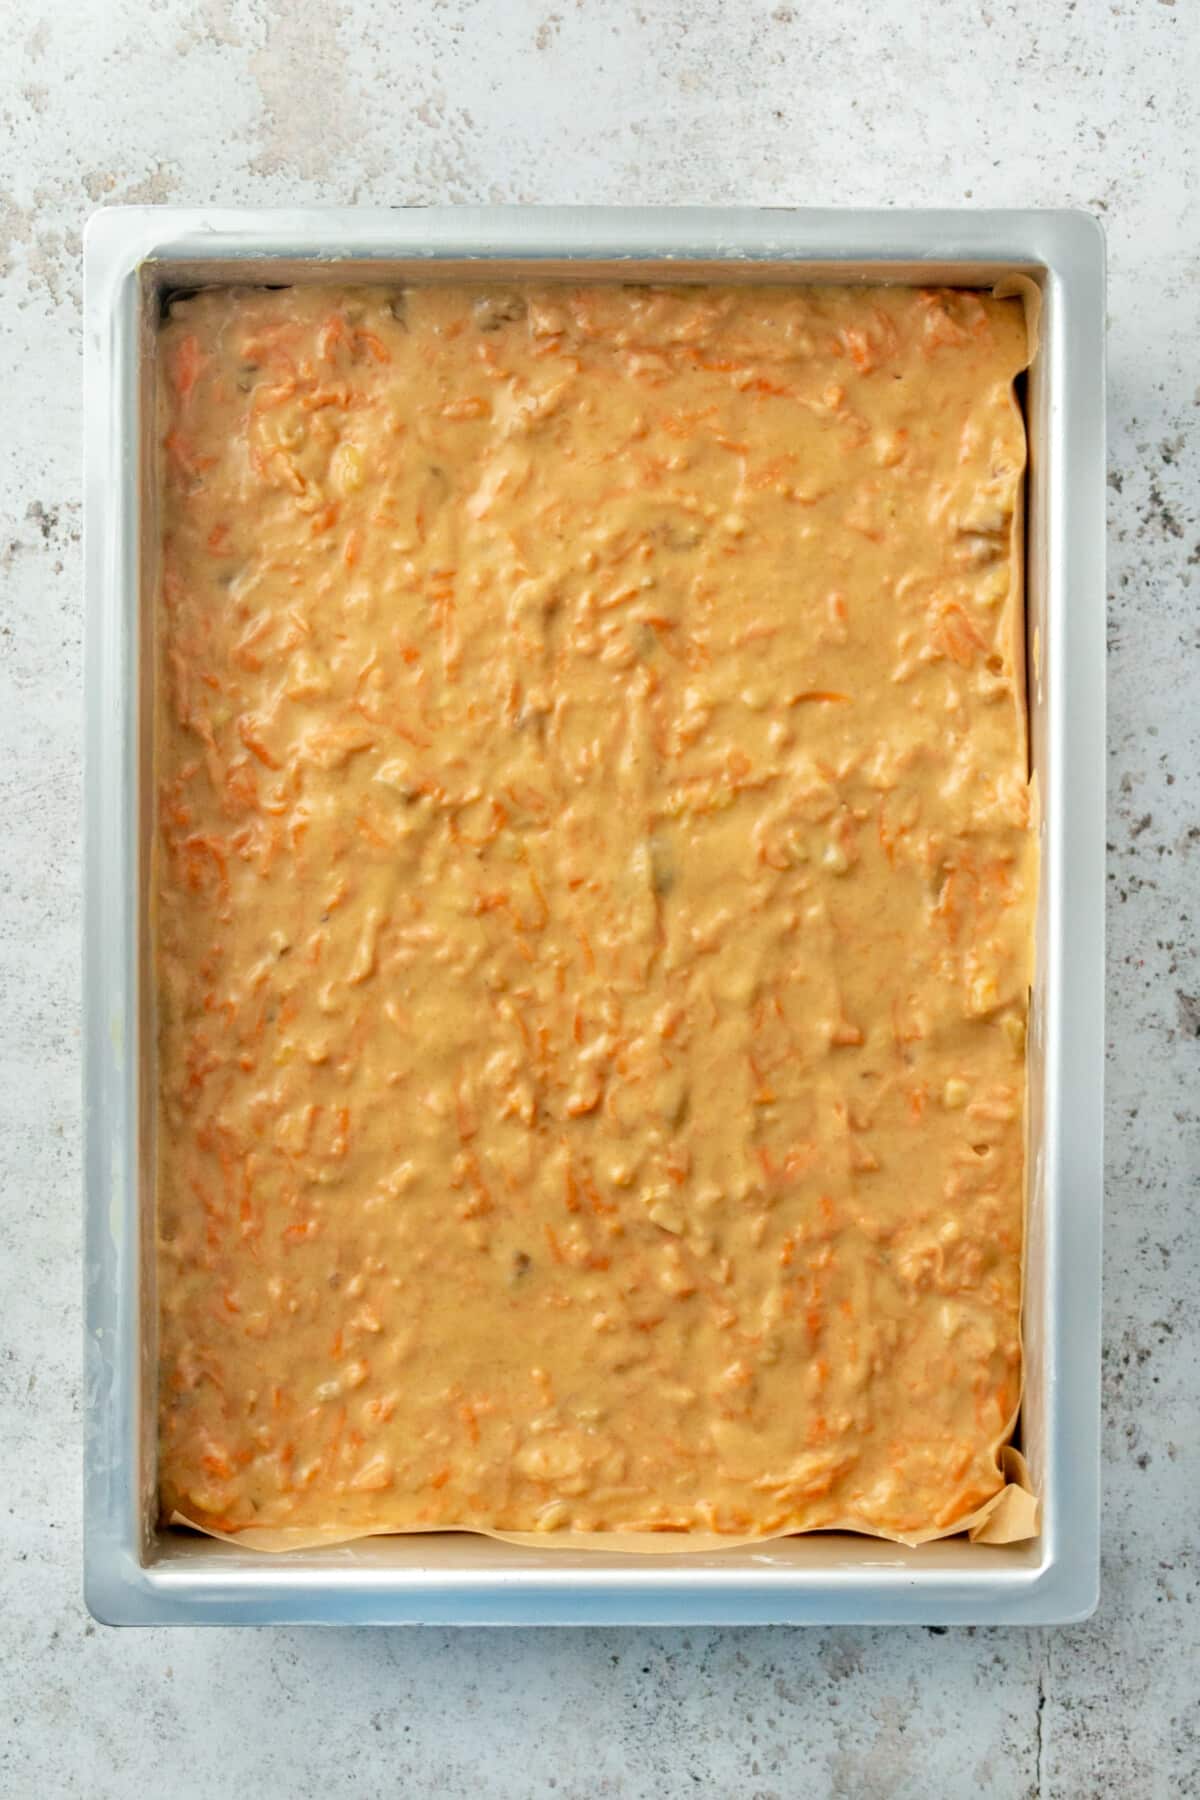 Carrot cake batter is shown sitting in a parchment lined baking pan.